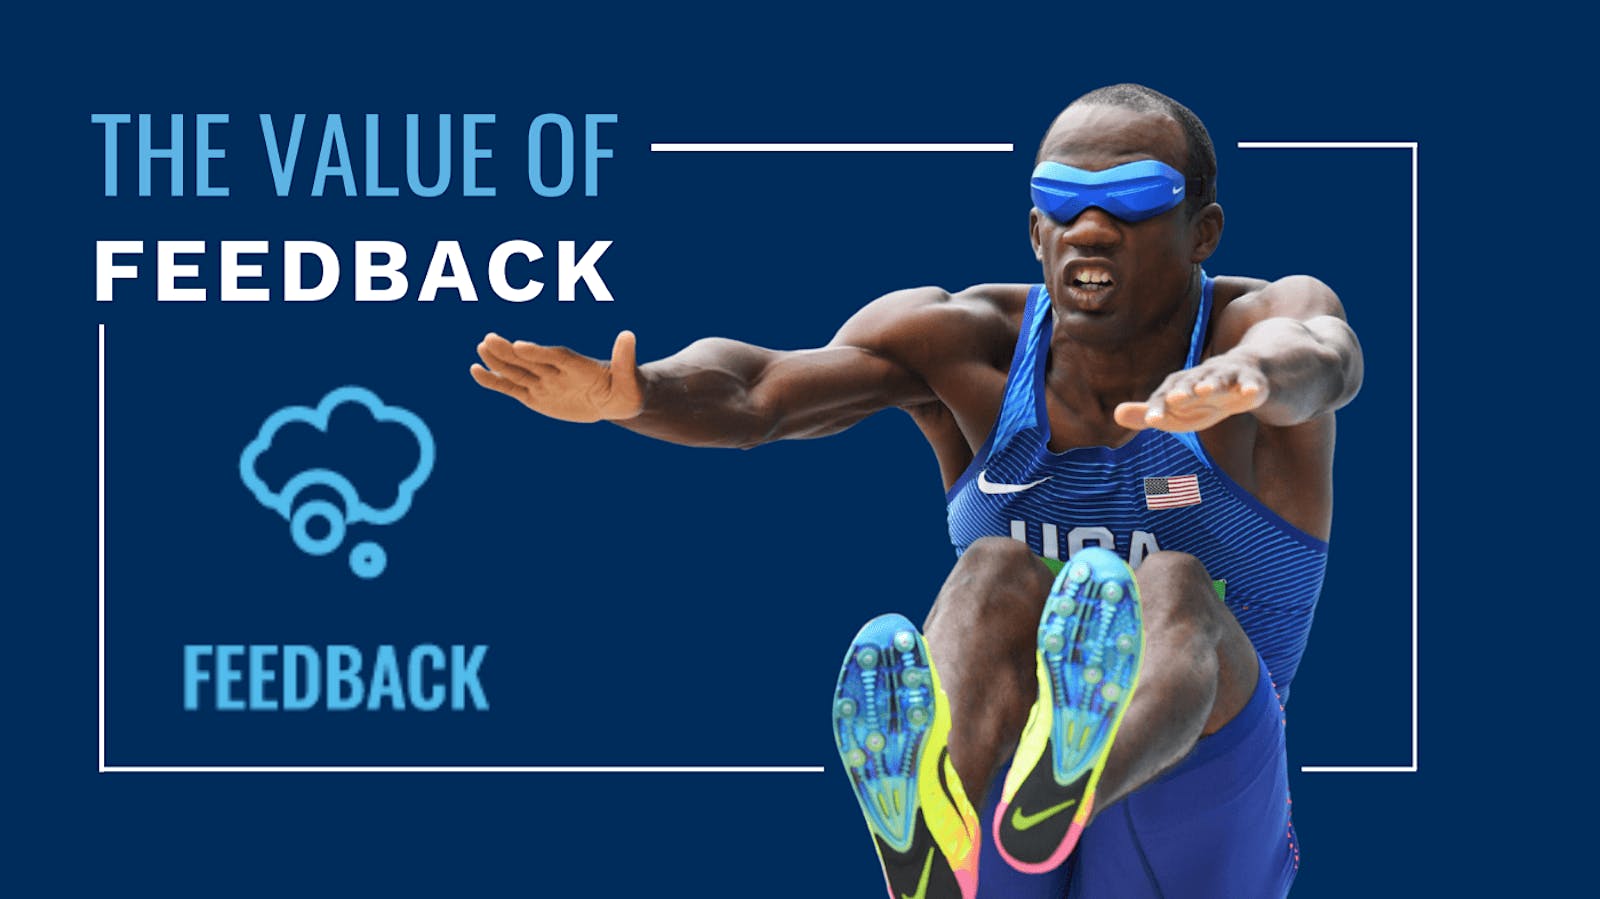 An athlete jumps, alongside the text 'The Value of Feedback'